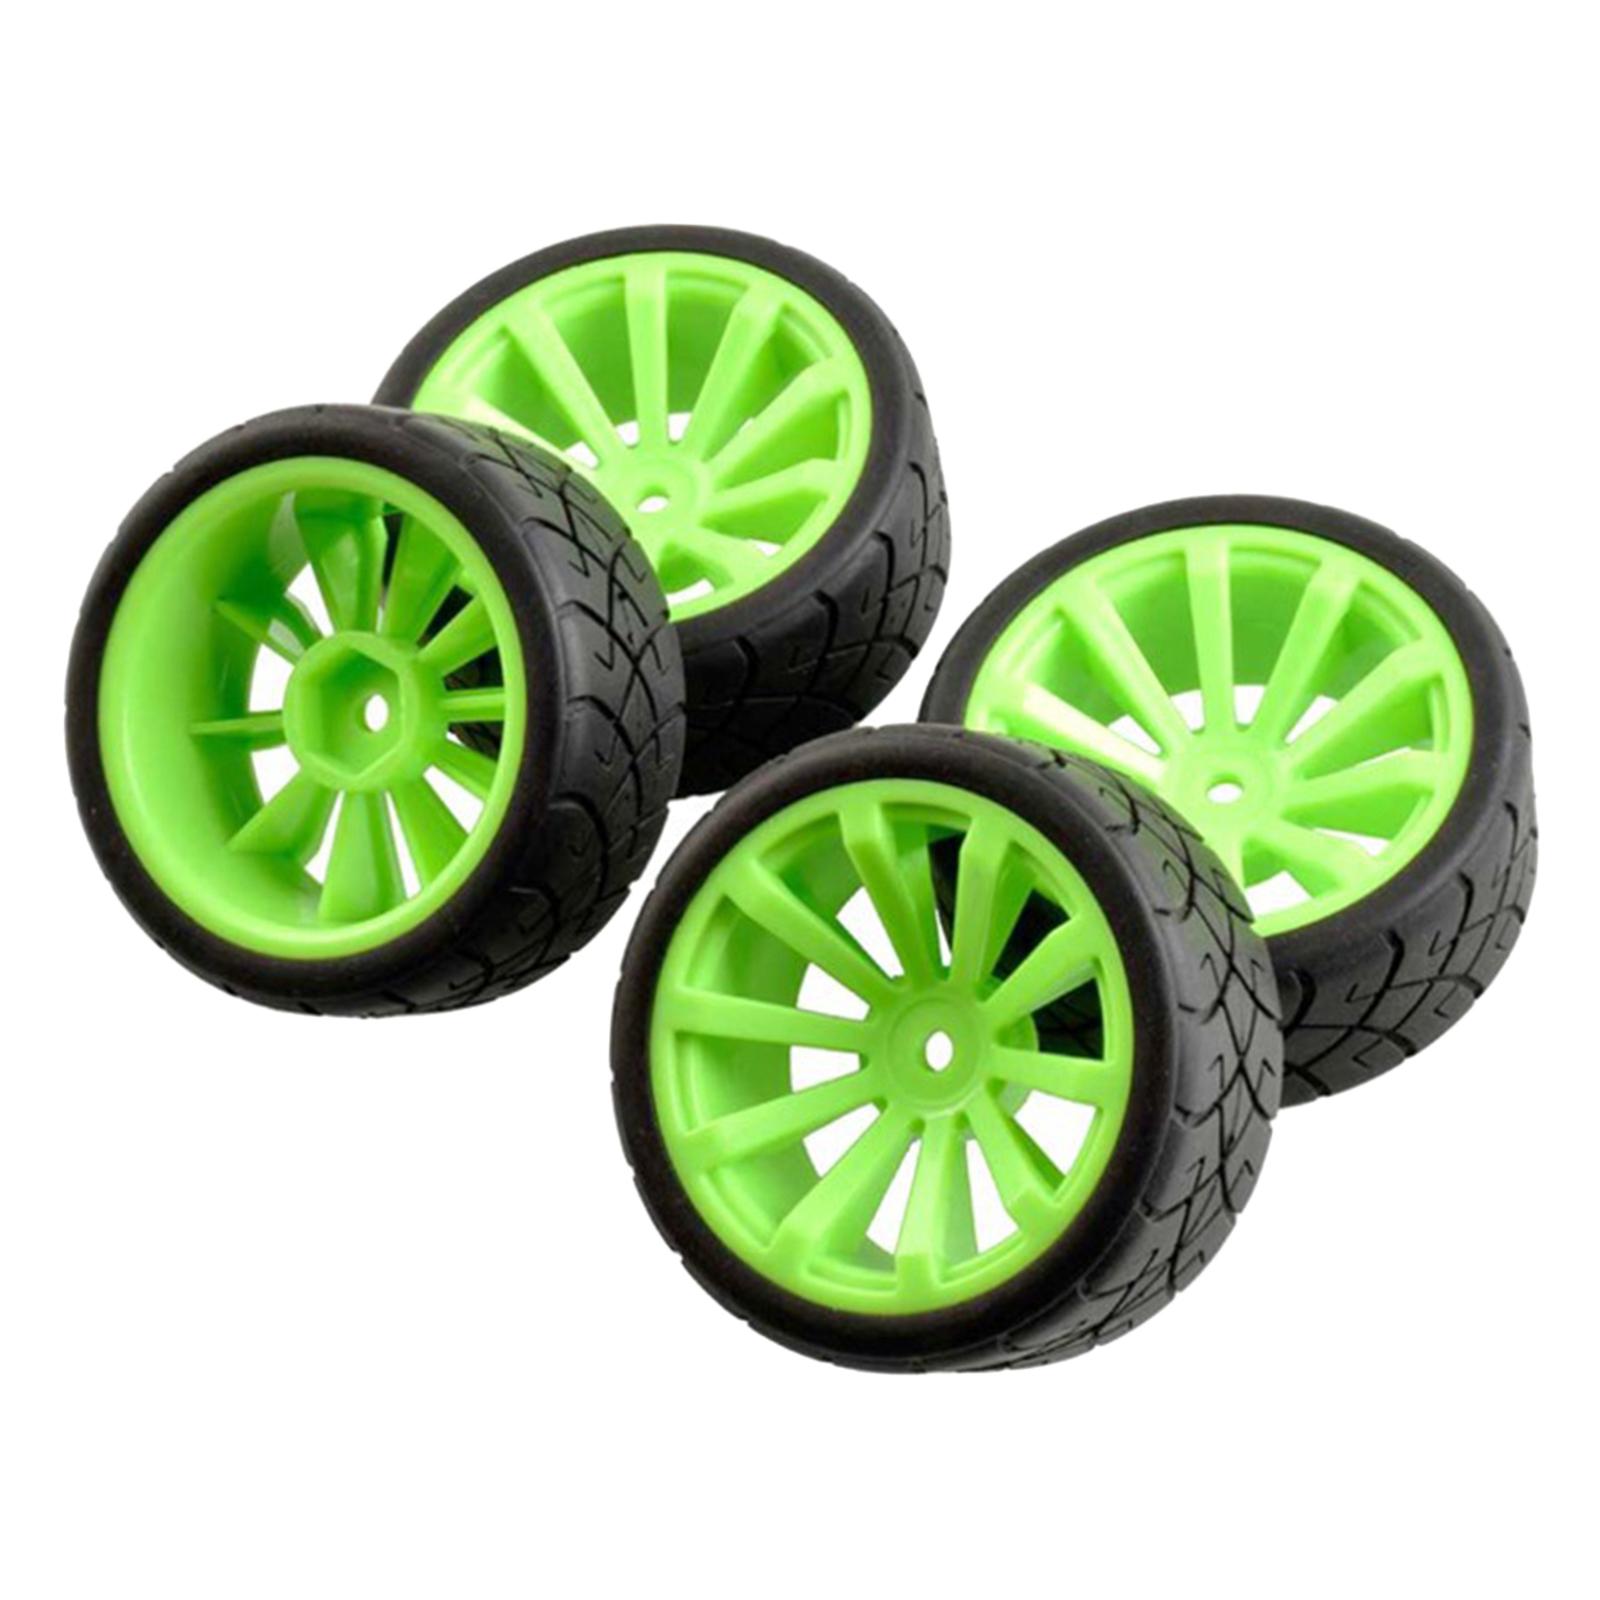 4 Pieces 144001124018124019 for 1:10 Rubber Tire RC Car , Green - image 2 of 7